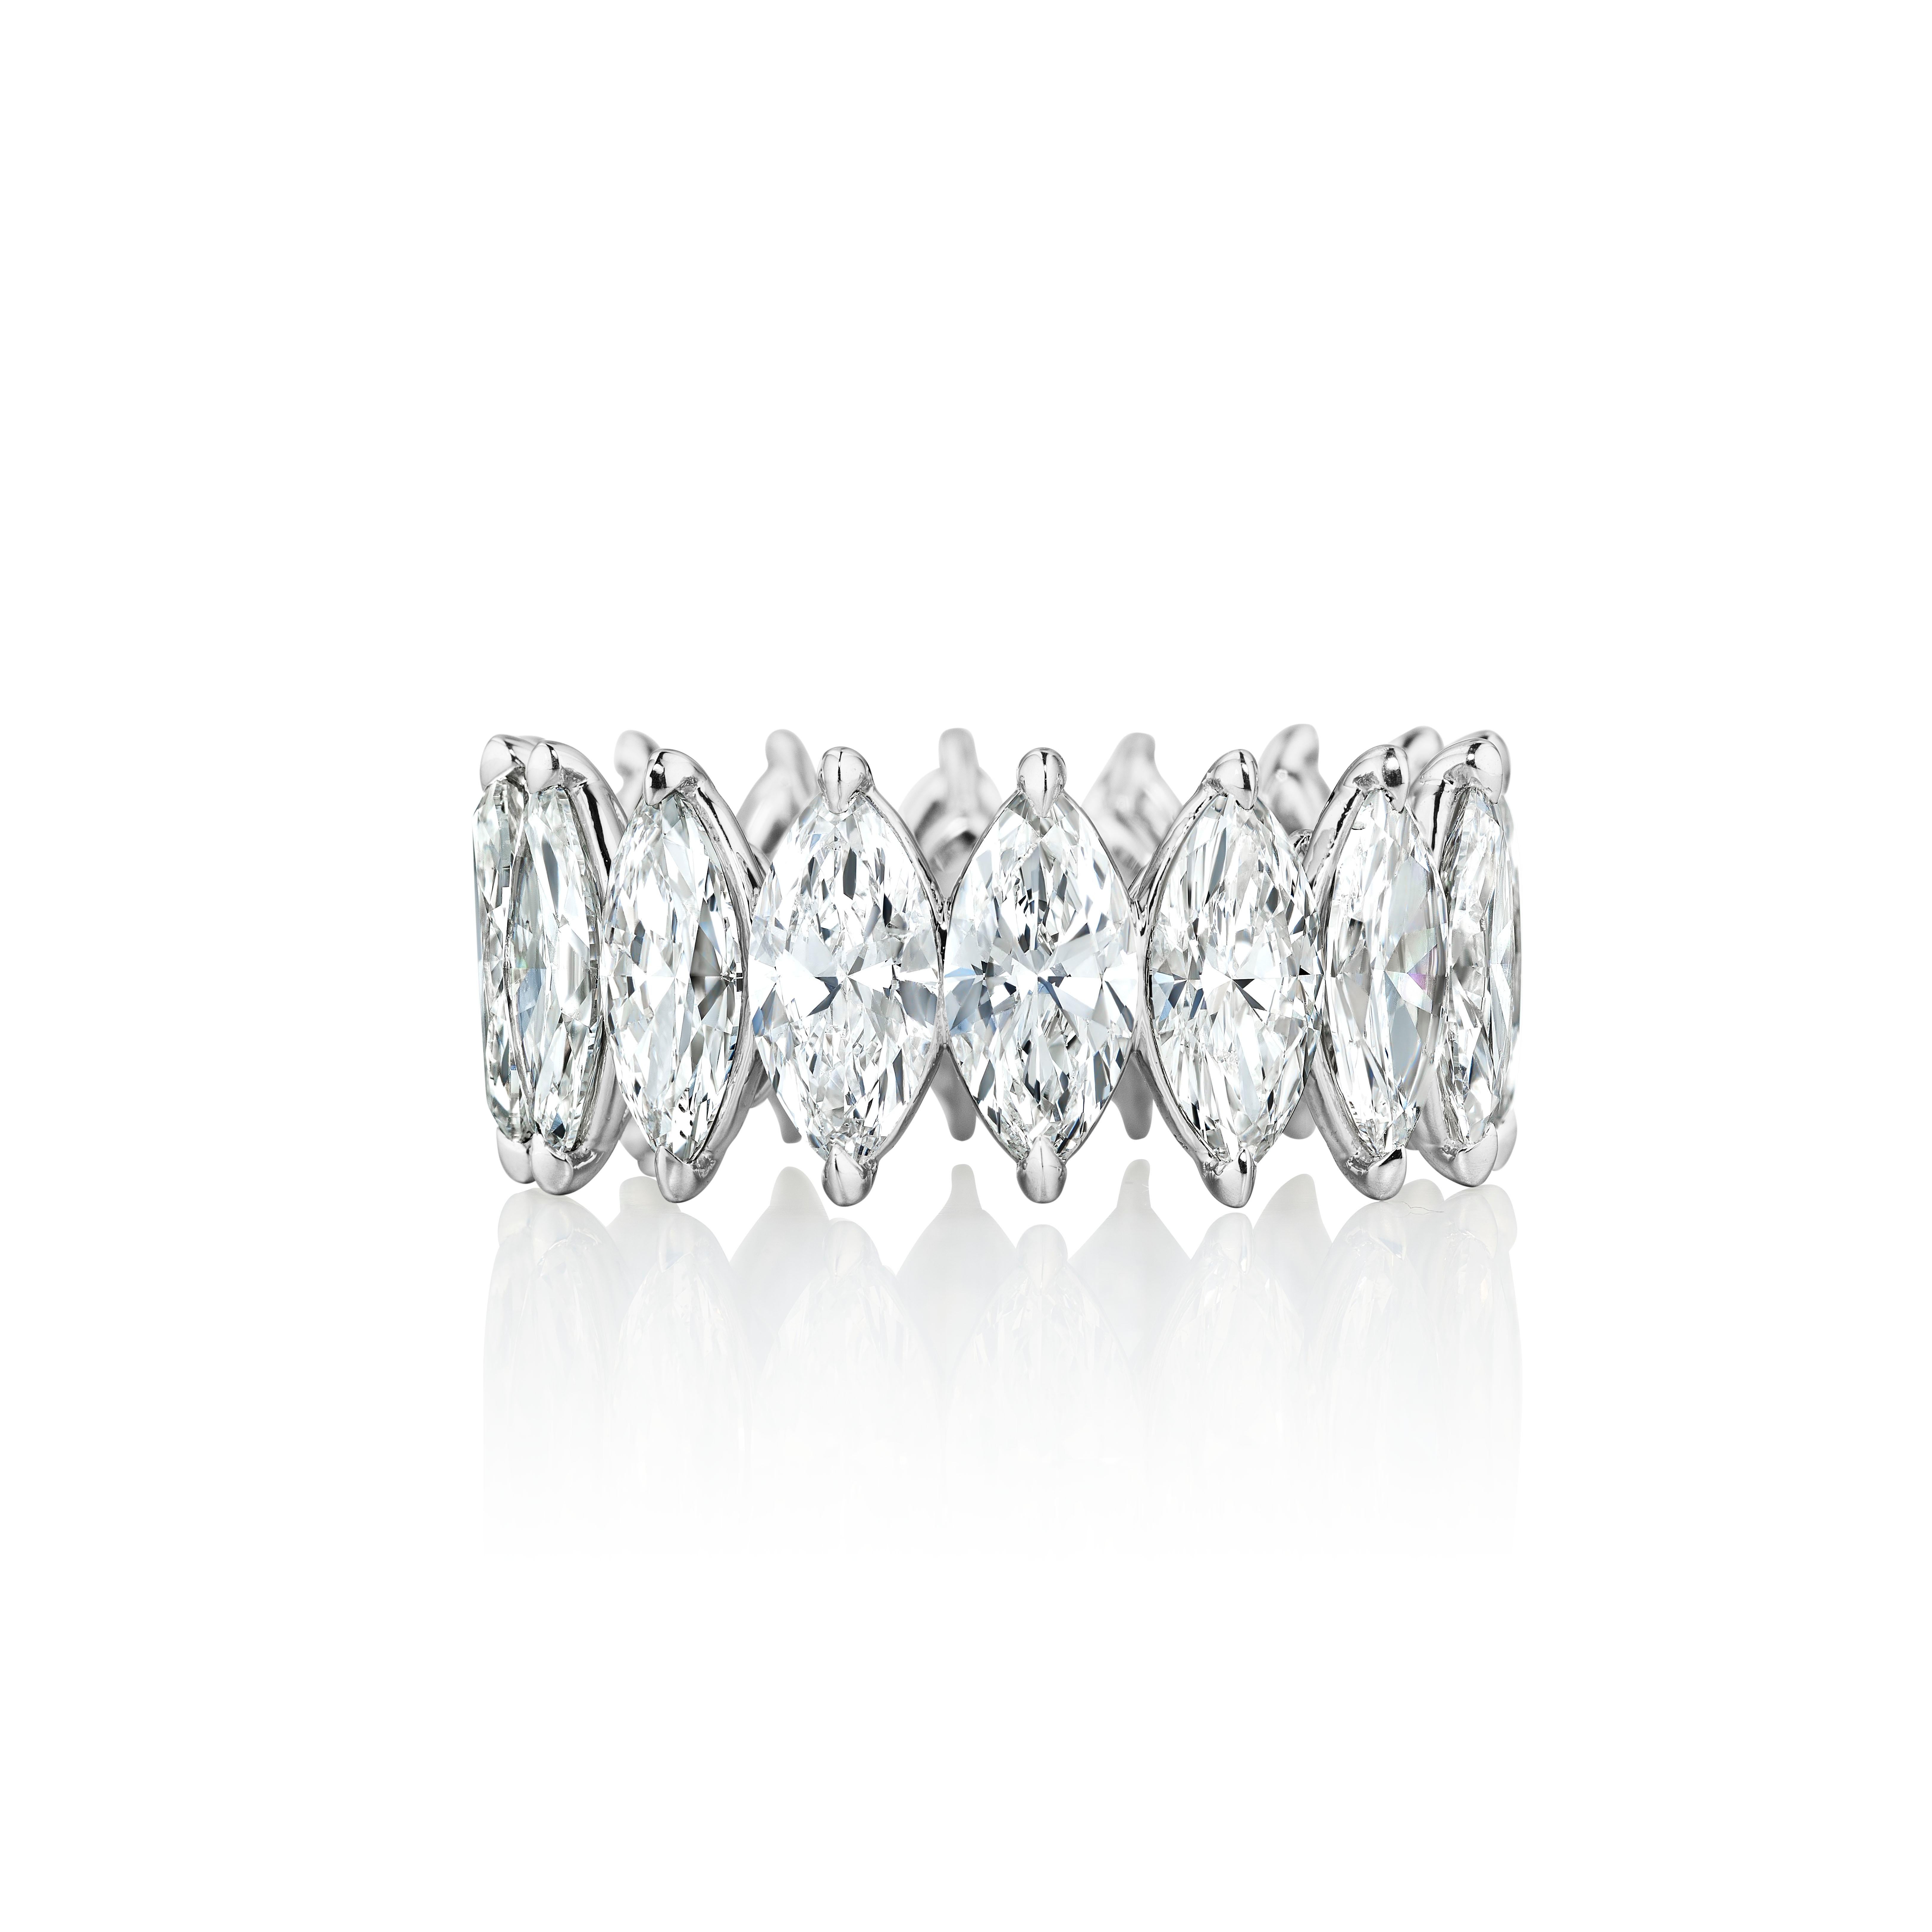 Marquise Cut GIA Certified D-E color 8.02 Carat Marquise Diamond Eternity Band Ring Platinum For Sale